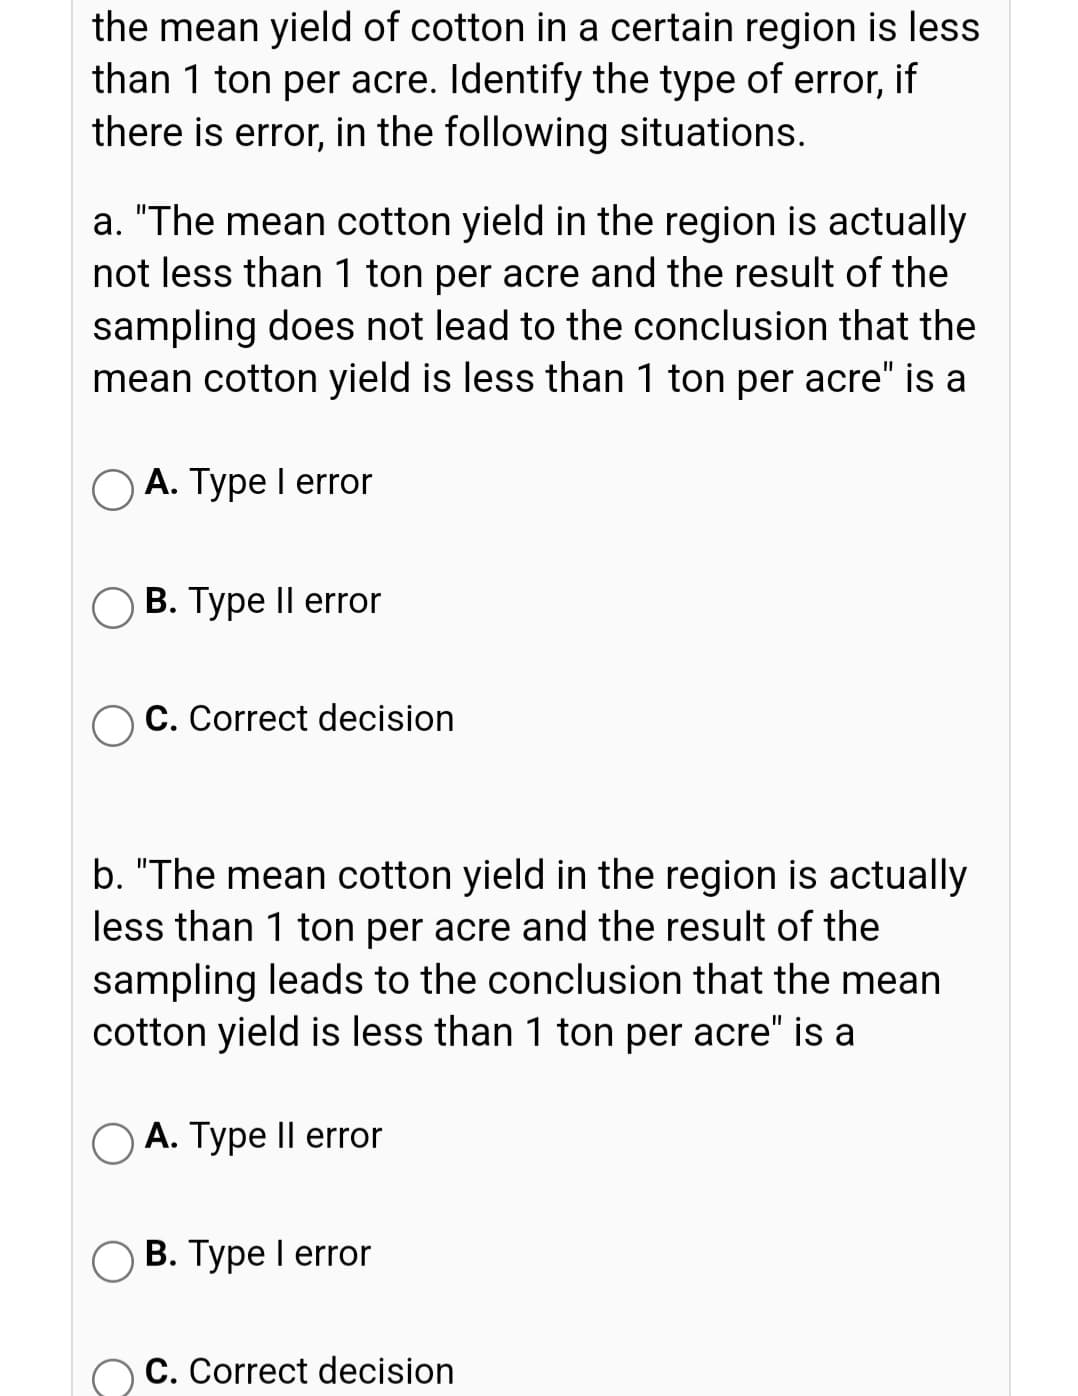 the mean yield of cotton in a certain region is less
than 1 ton per acre. Identify the type of error, if
there is error, in the following situations.
a. "The mean cotton yield in the region is actually
not less than 1 ton per acre and the result of the
sampling does not lead to the conclusion that the
mean cotton yield is less than 1 ton per acre" is a
O A. Type I error
В. Туре II error
C. Correct decision
b. "The mean cotton yield in the region is actually
less than 1 ton per acre and the result of the
sampling leads to the conclusion that the mean
cotton yield is less than 1 ton per acre" is a
O A. Type Il error
В. Туре 1 error
C. Correct decision
